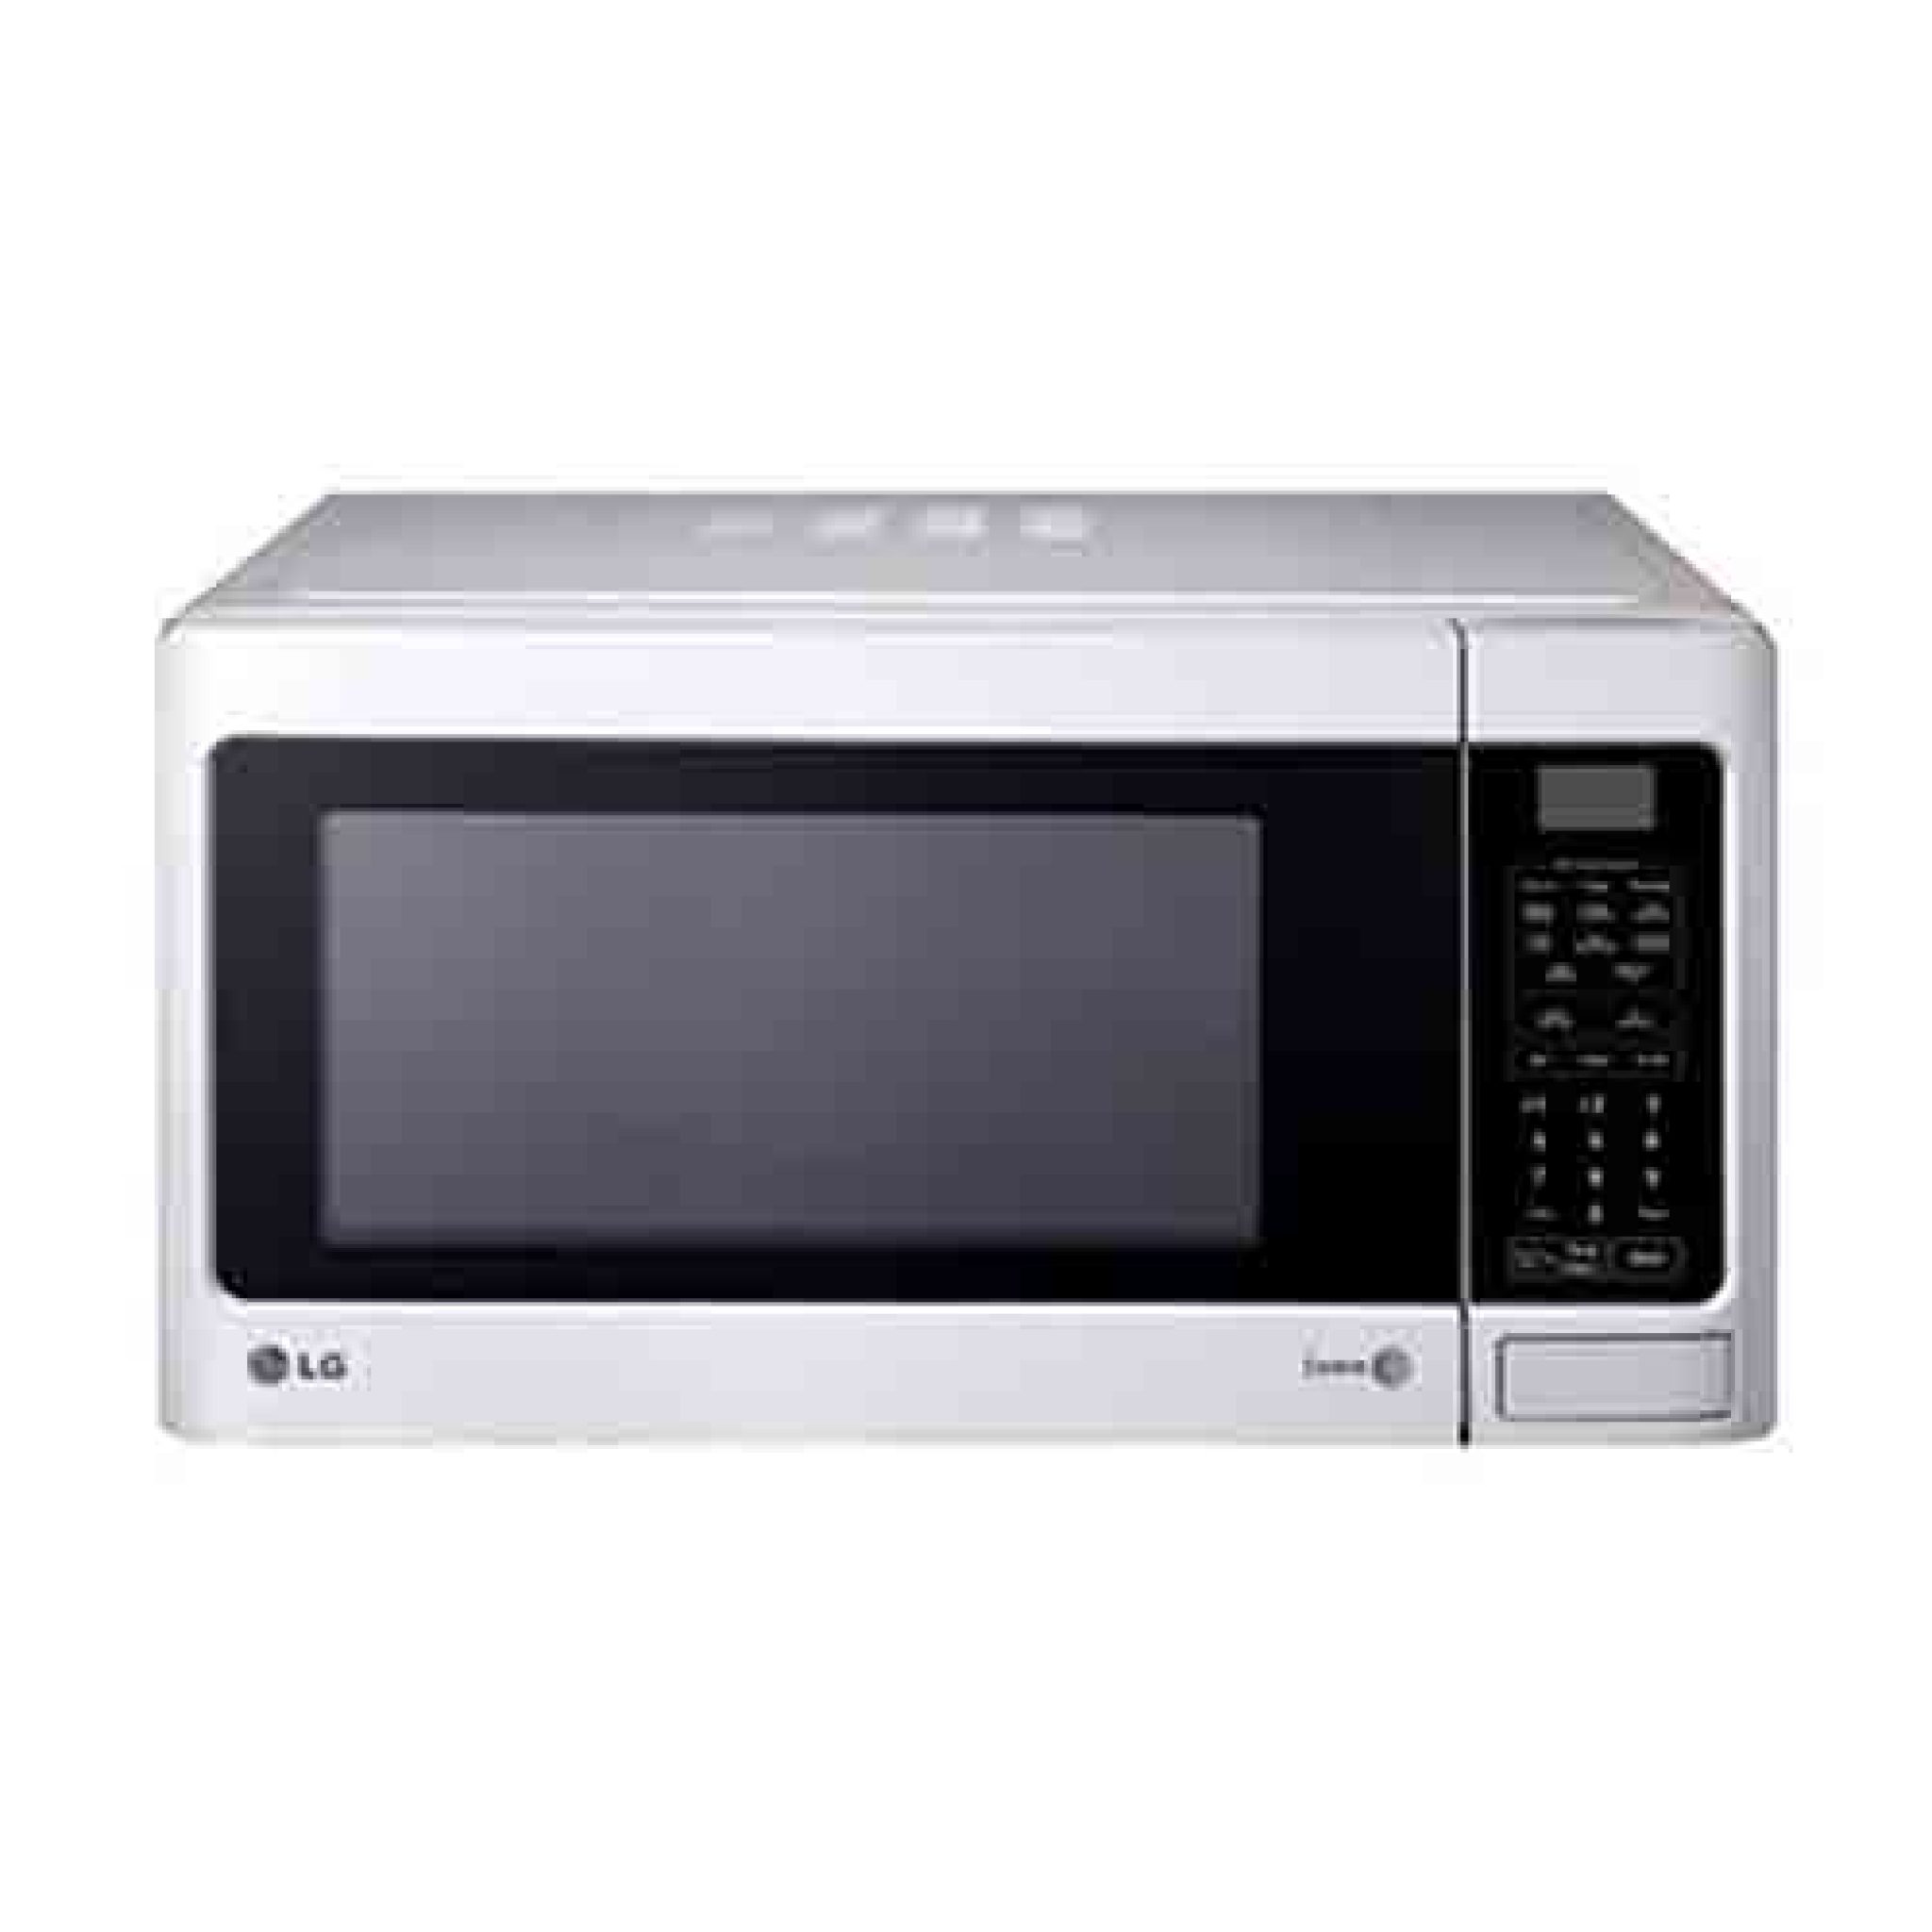 LG MS5642G 56 Ltr Microwave Oven Price in Pakistan 2019 – Compare